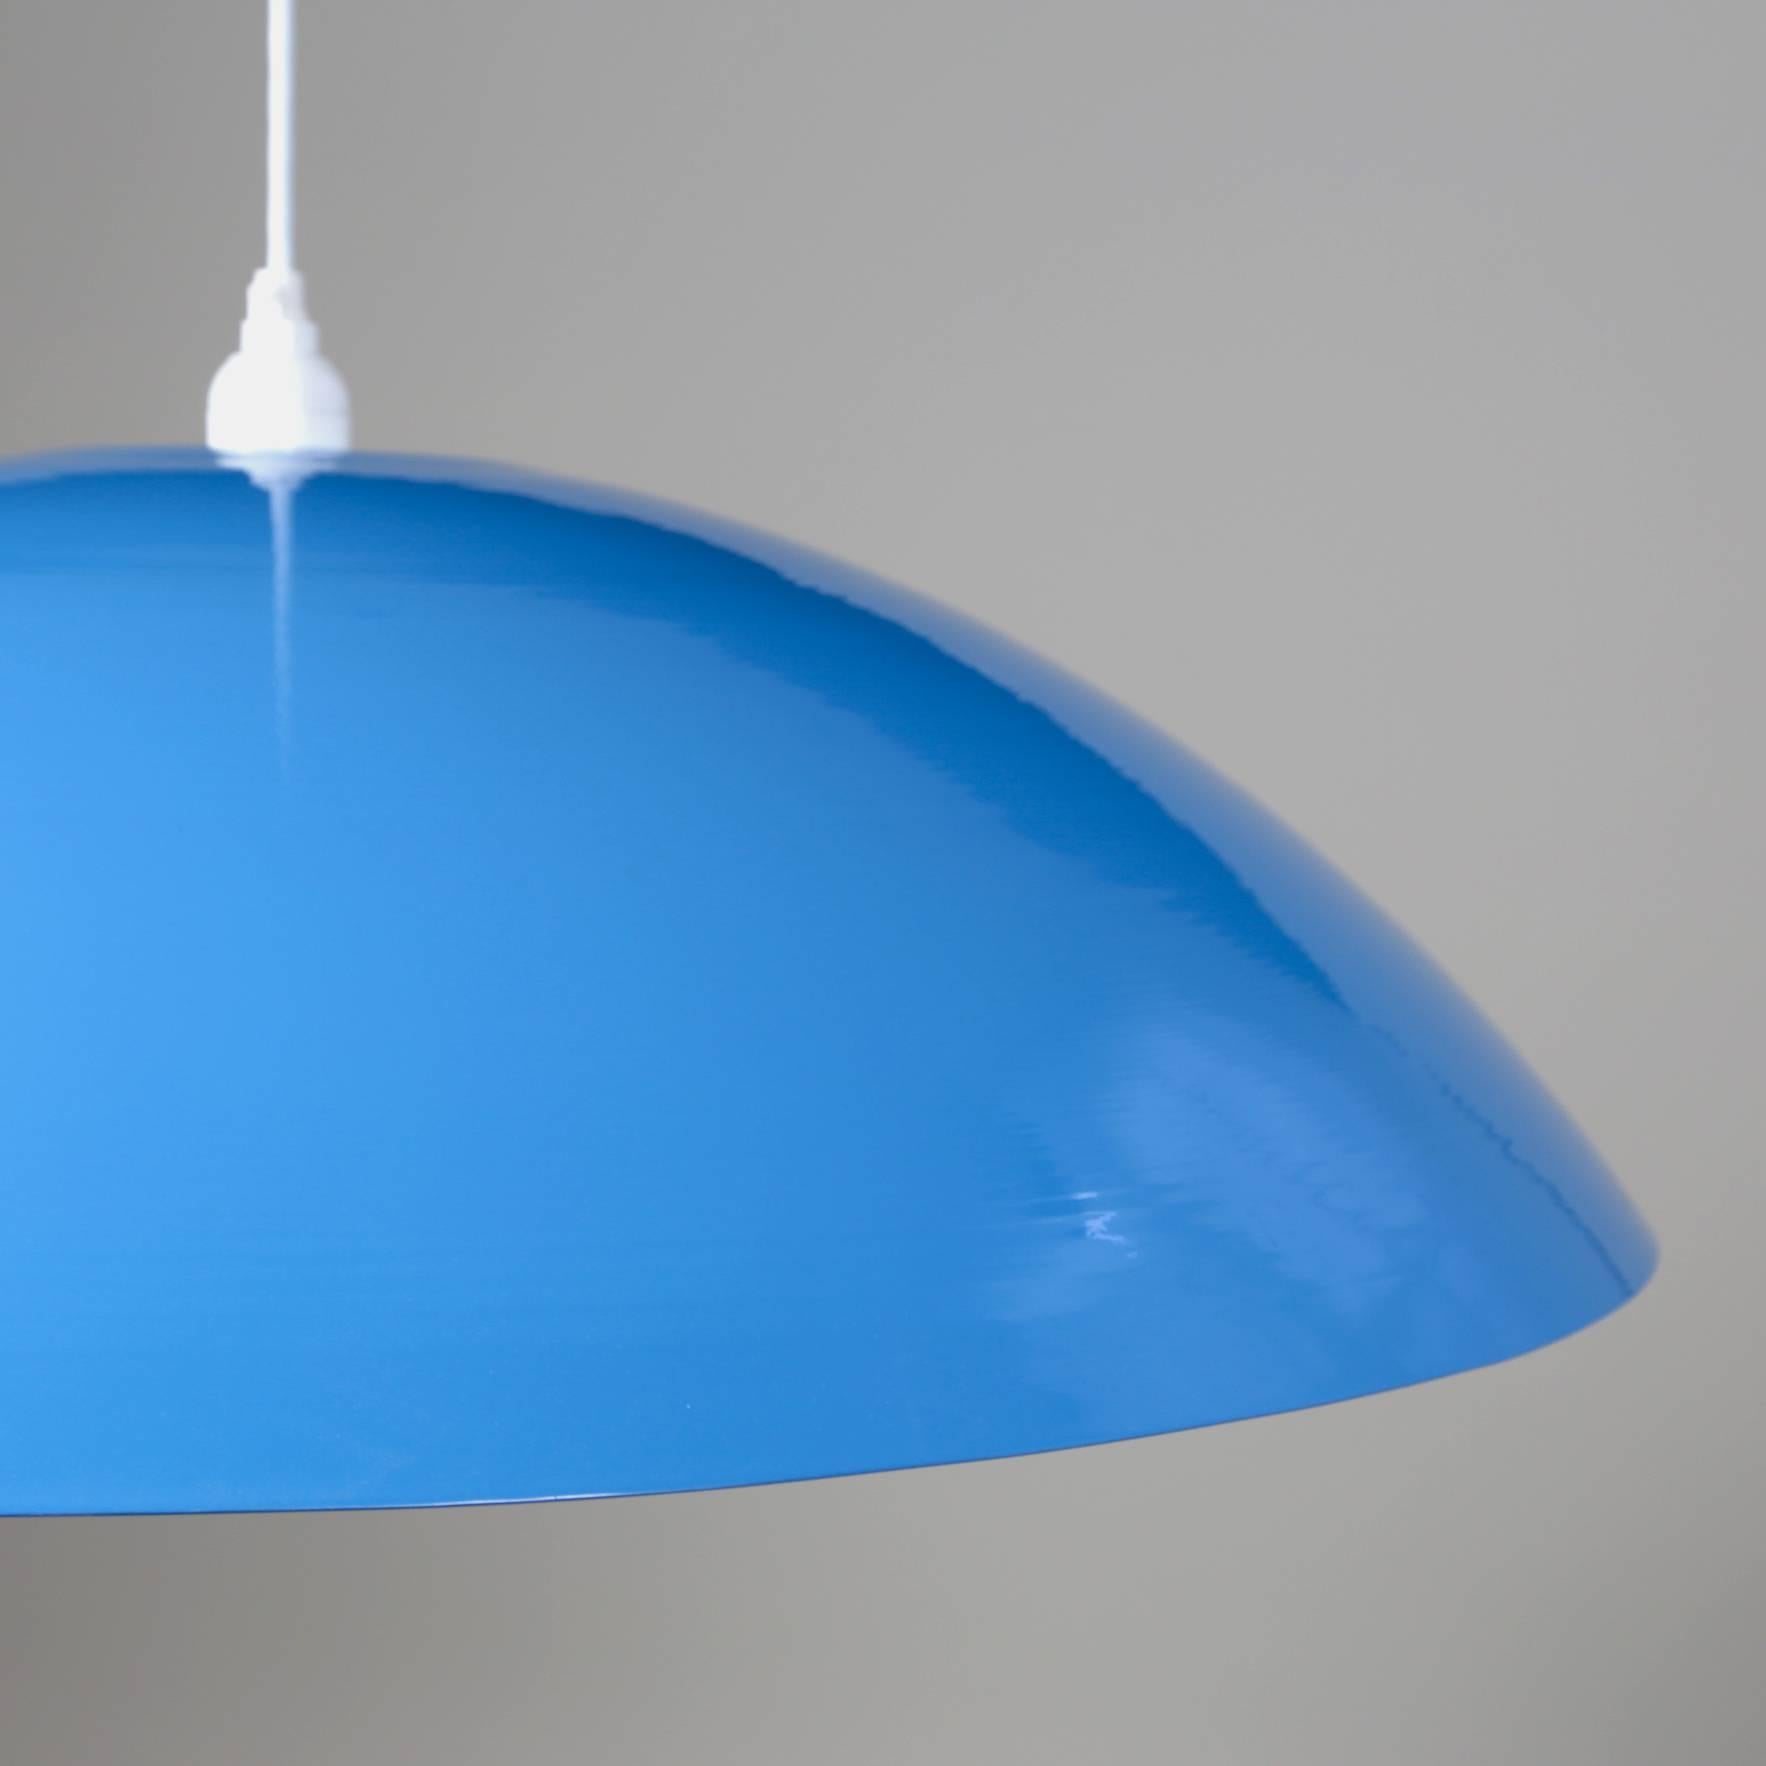 This listing is for 1x Industry pendant in light blue by RESEARCH Lighting. We can customize the color to almost any RAL color.

Materials: Aluminum
Finish: Exterior & interior is powder coated in light blue
Electronics: 1x E26 Socket, G40 Bulb